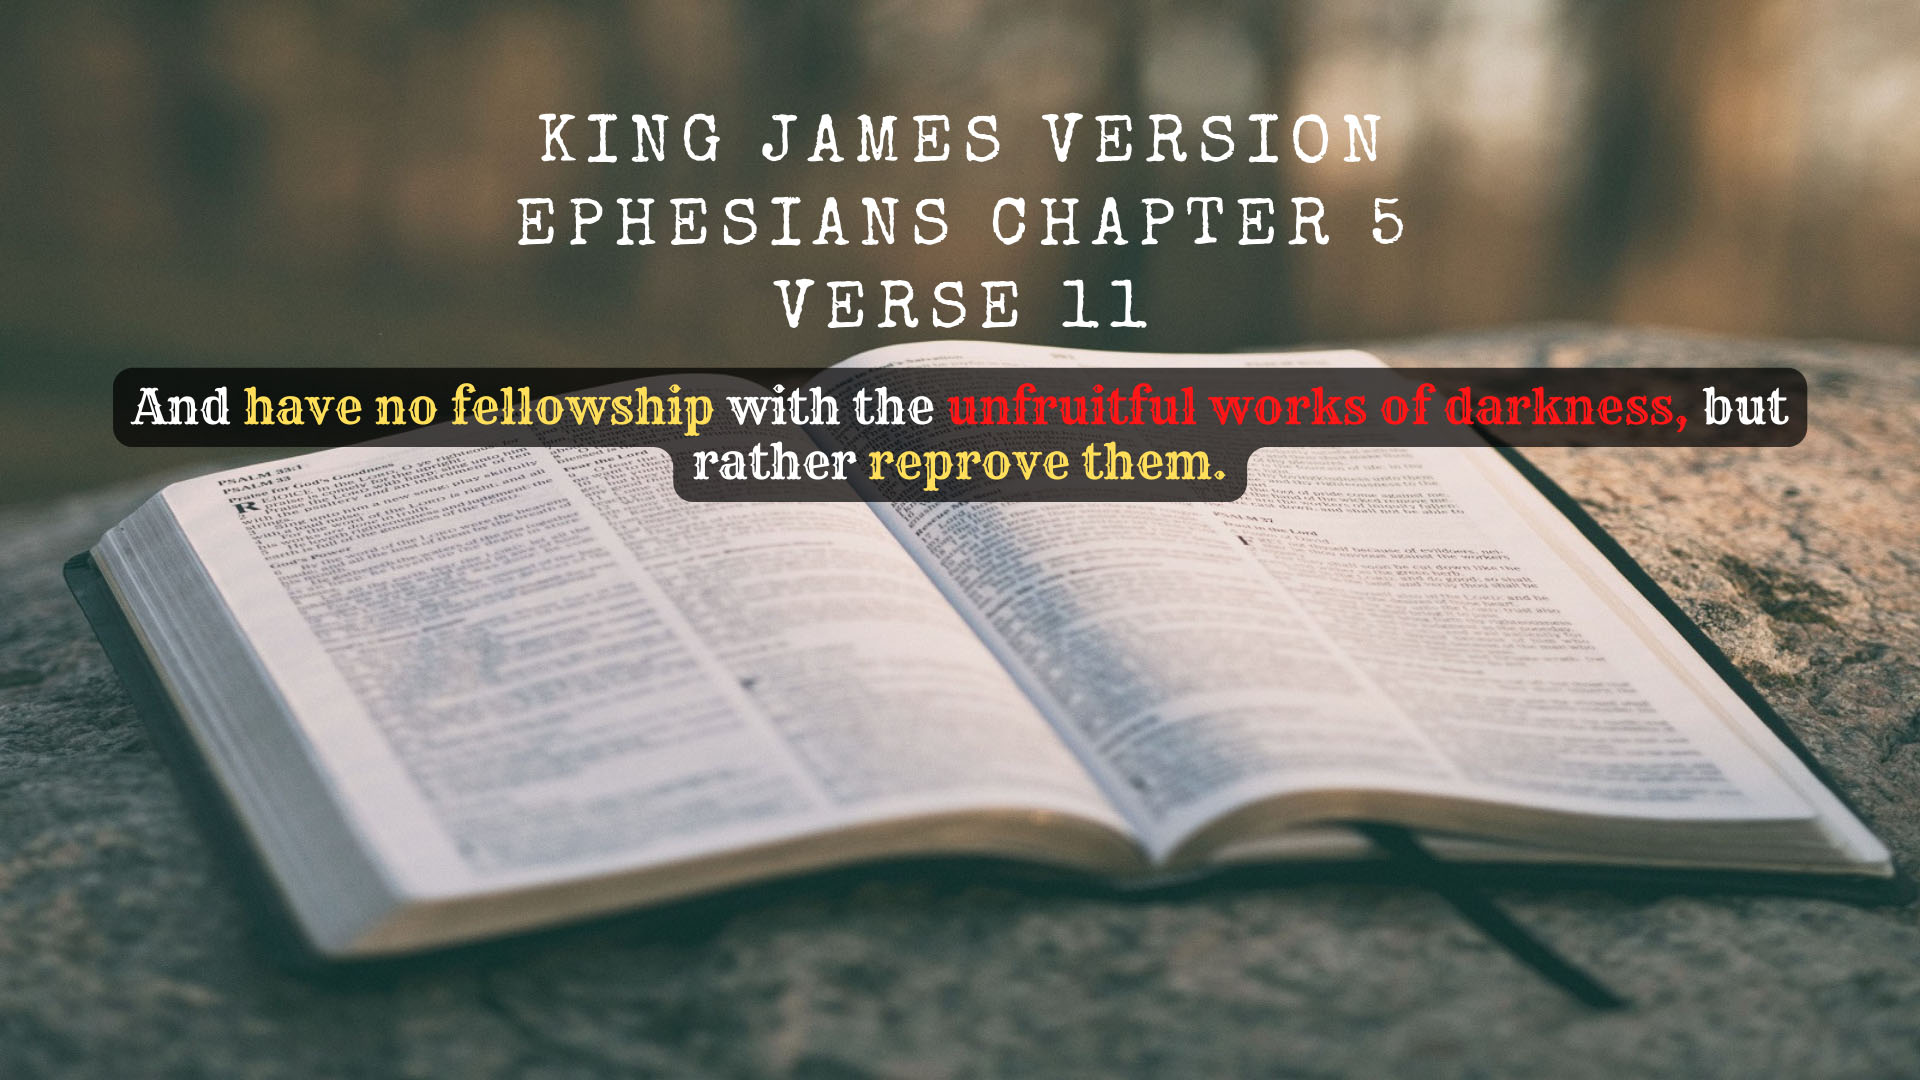 King James Holy Bible Ephesians Chapter 5 Verse 11 And have no fellowship with the unfruitful works of darkness but rather reprove them